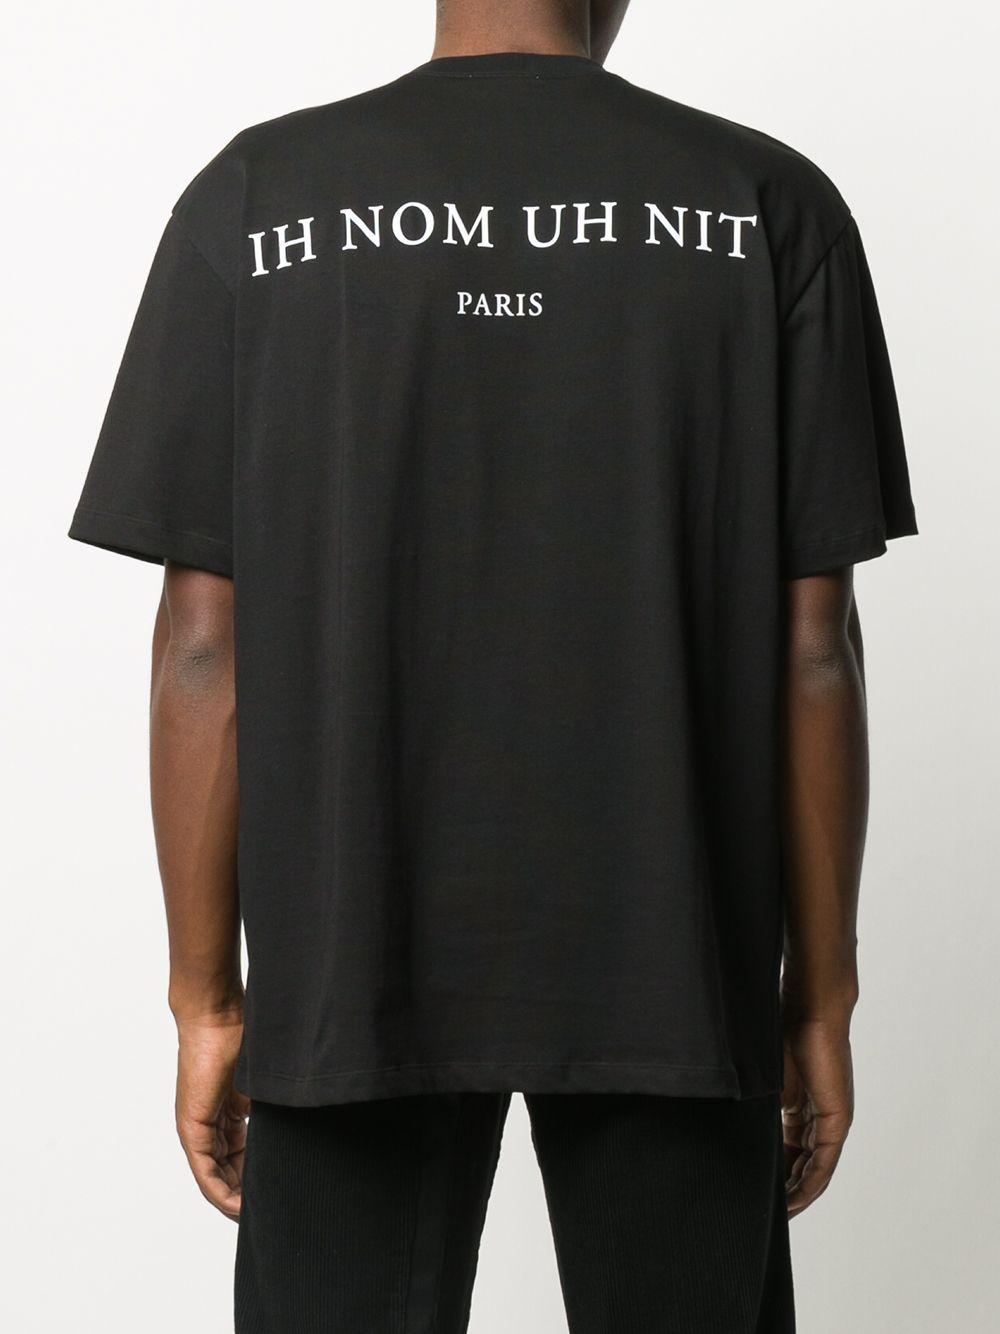 ih nom uh nit Cotton Graphic Print Short-sleeve T-shirt in Black for ...